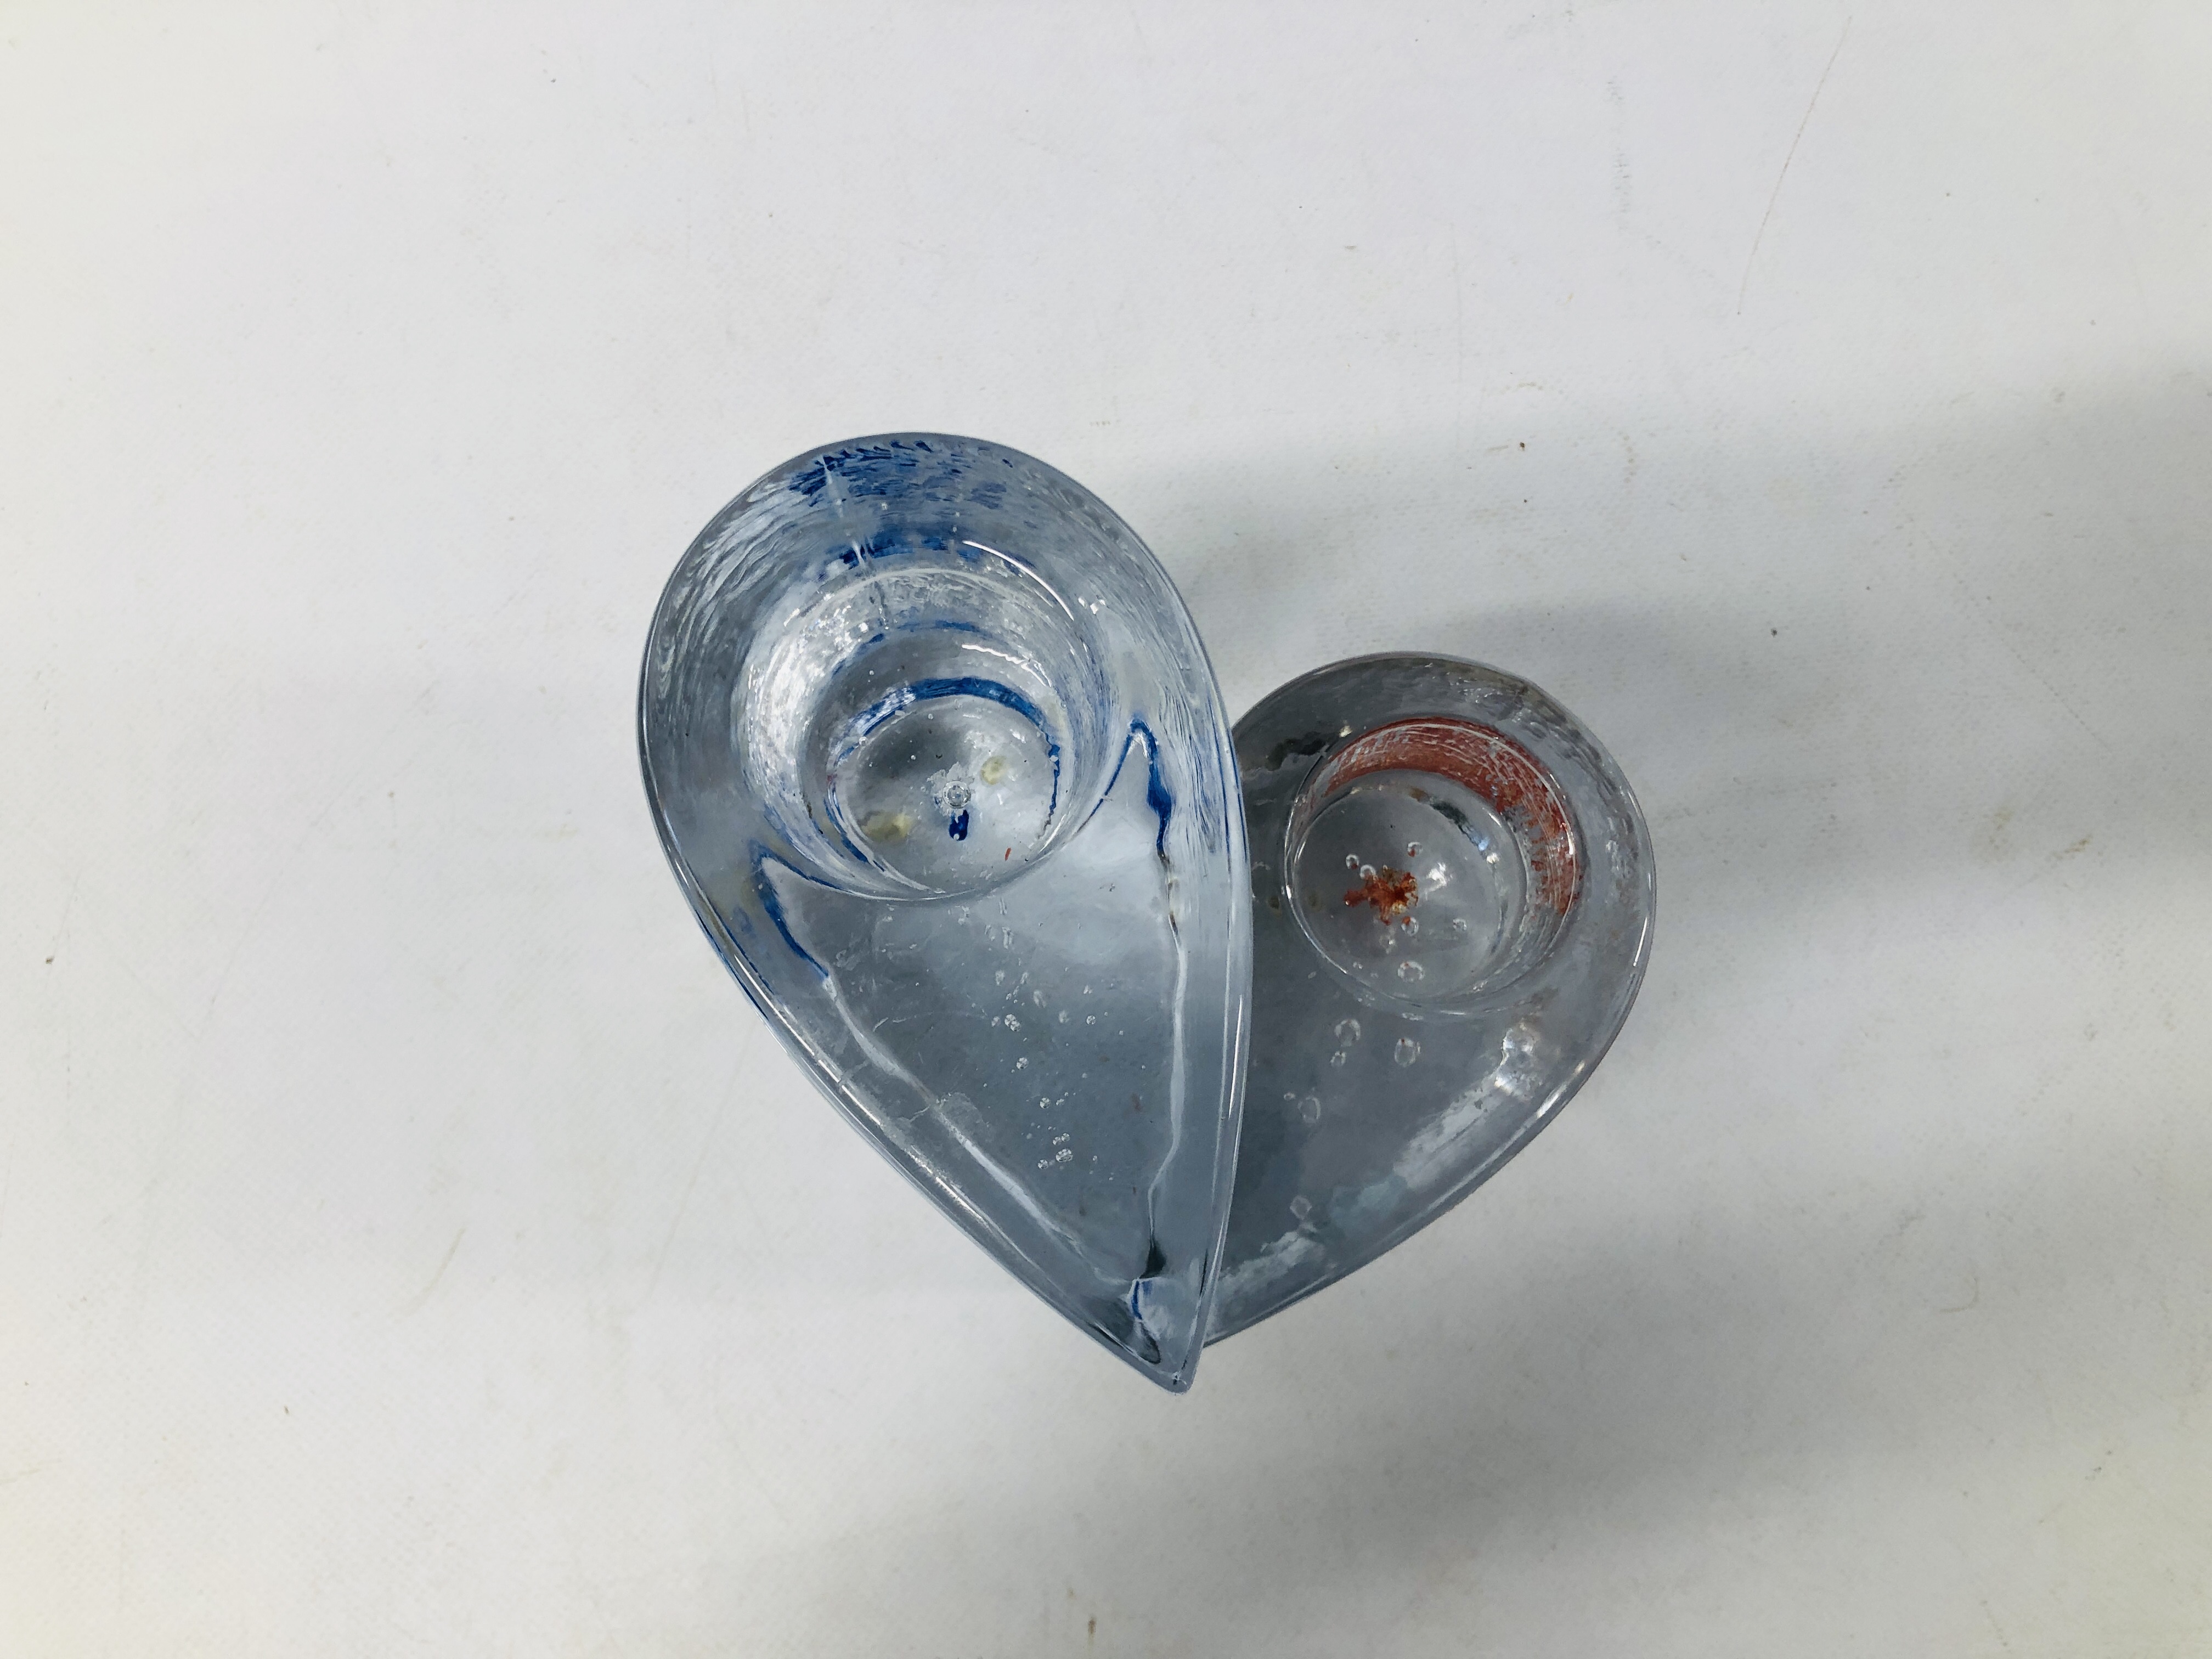 A KIELL ENTMAN "FIRE & ACE" GLASS TEALIGHT SCULPTURE IN THE FORM OF A HEART HEIGHT 16CM. - Image 3 of 4